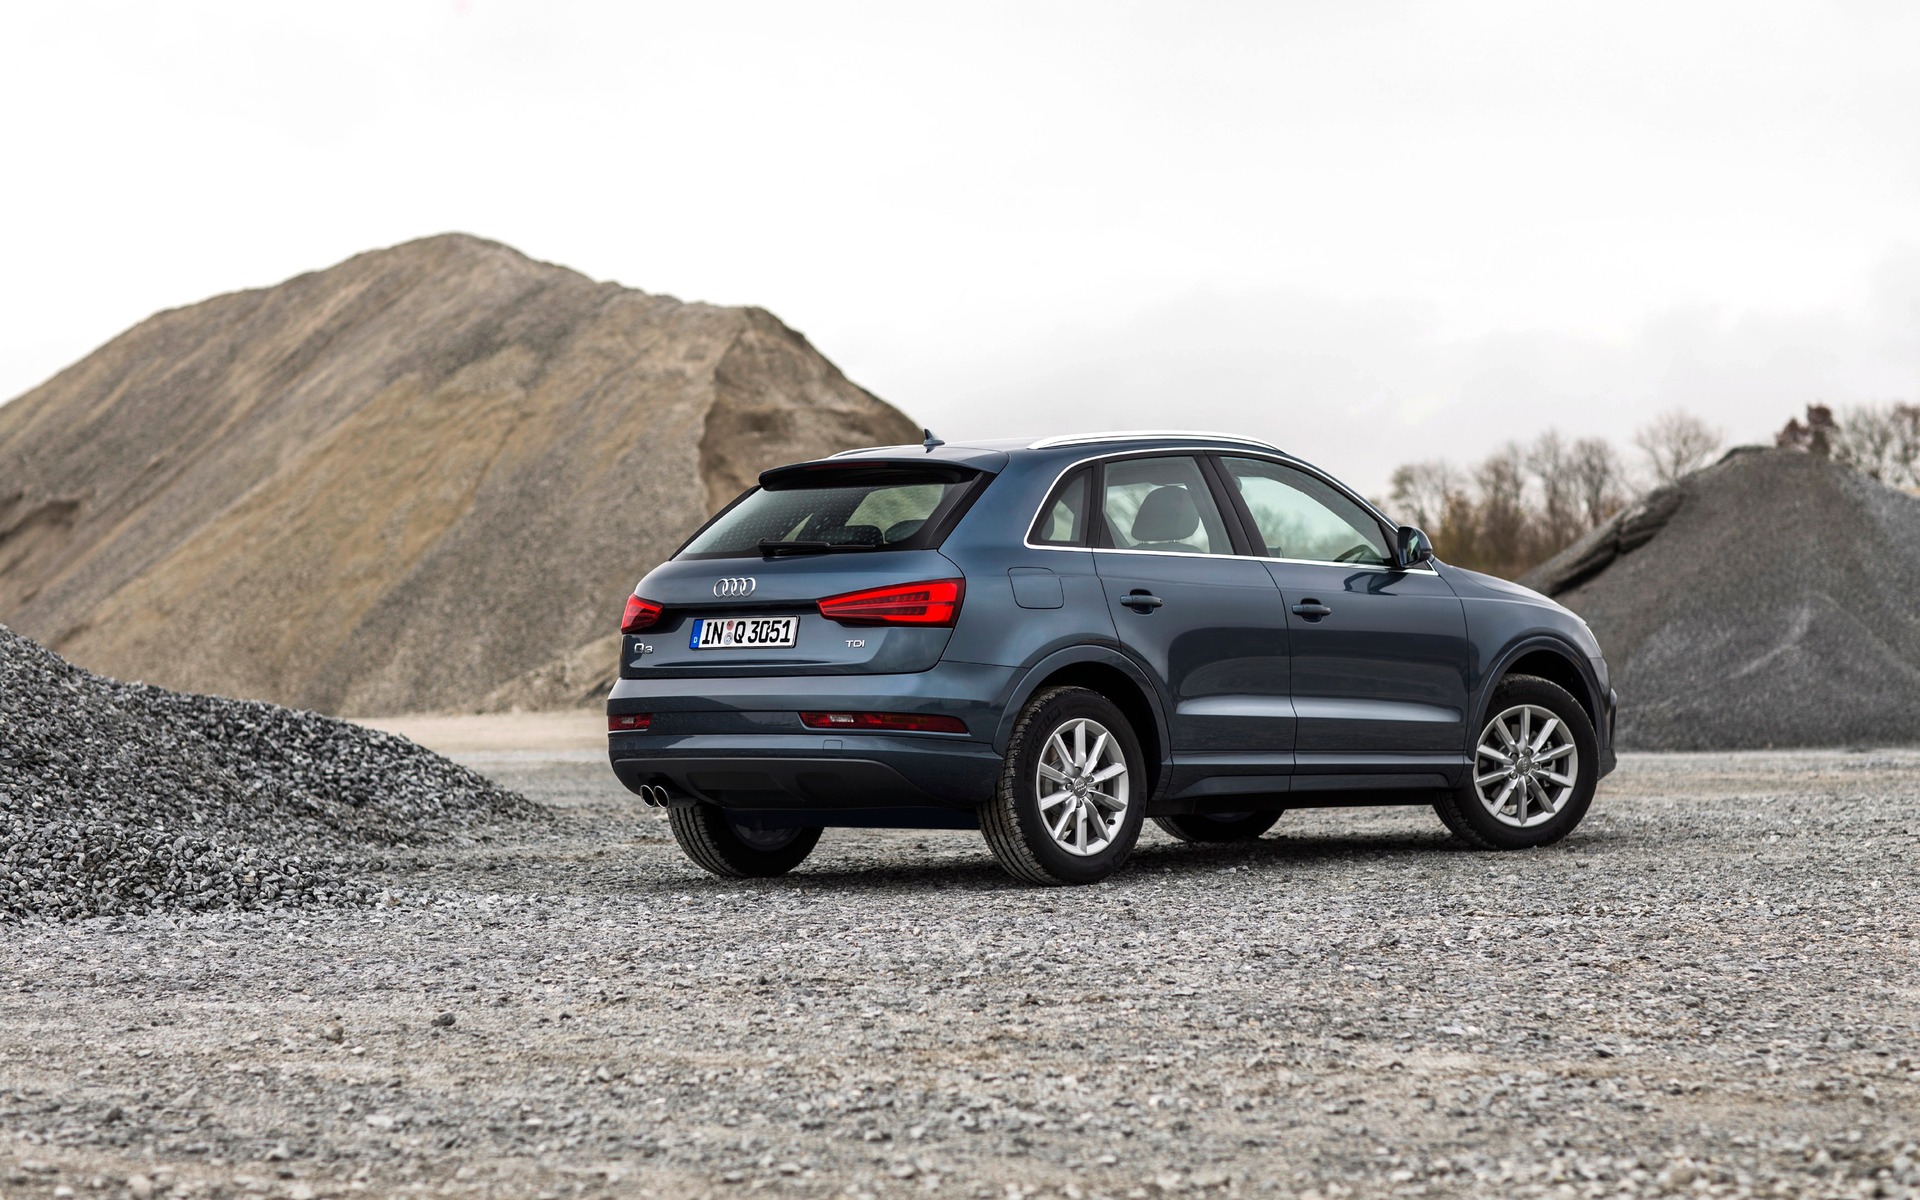 It's worth shopping around before committing to this smallest of Audi SUVs.